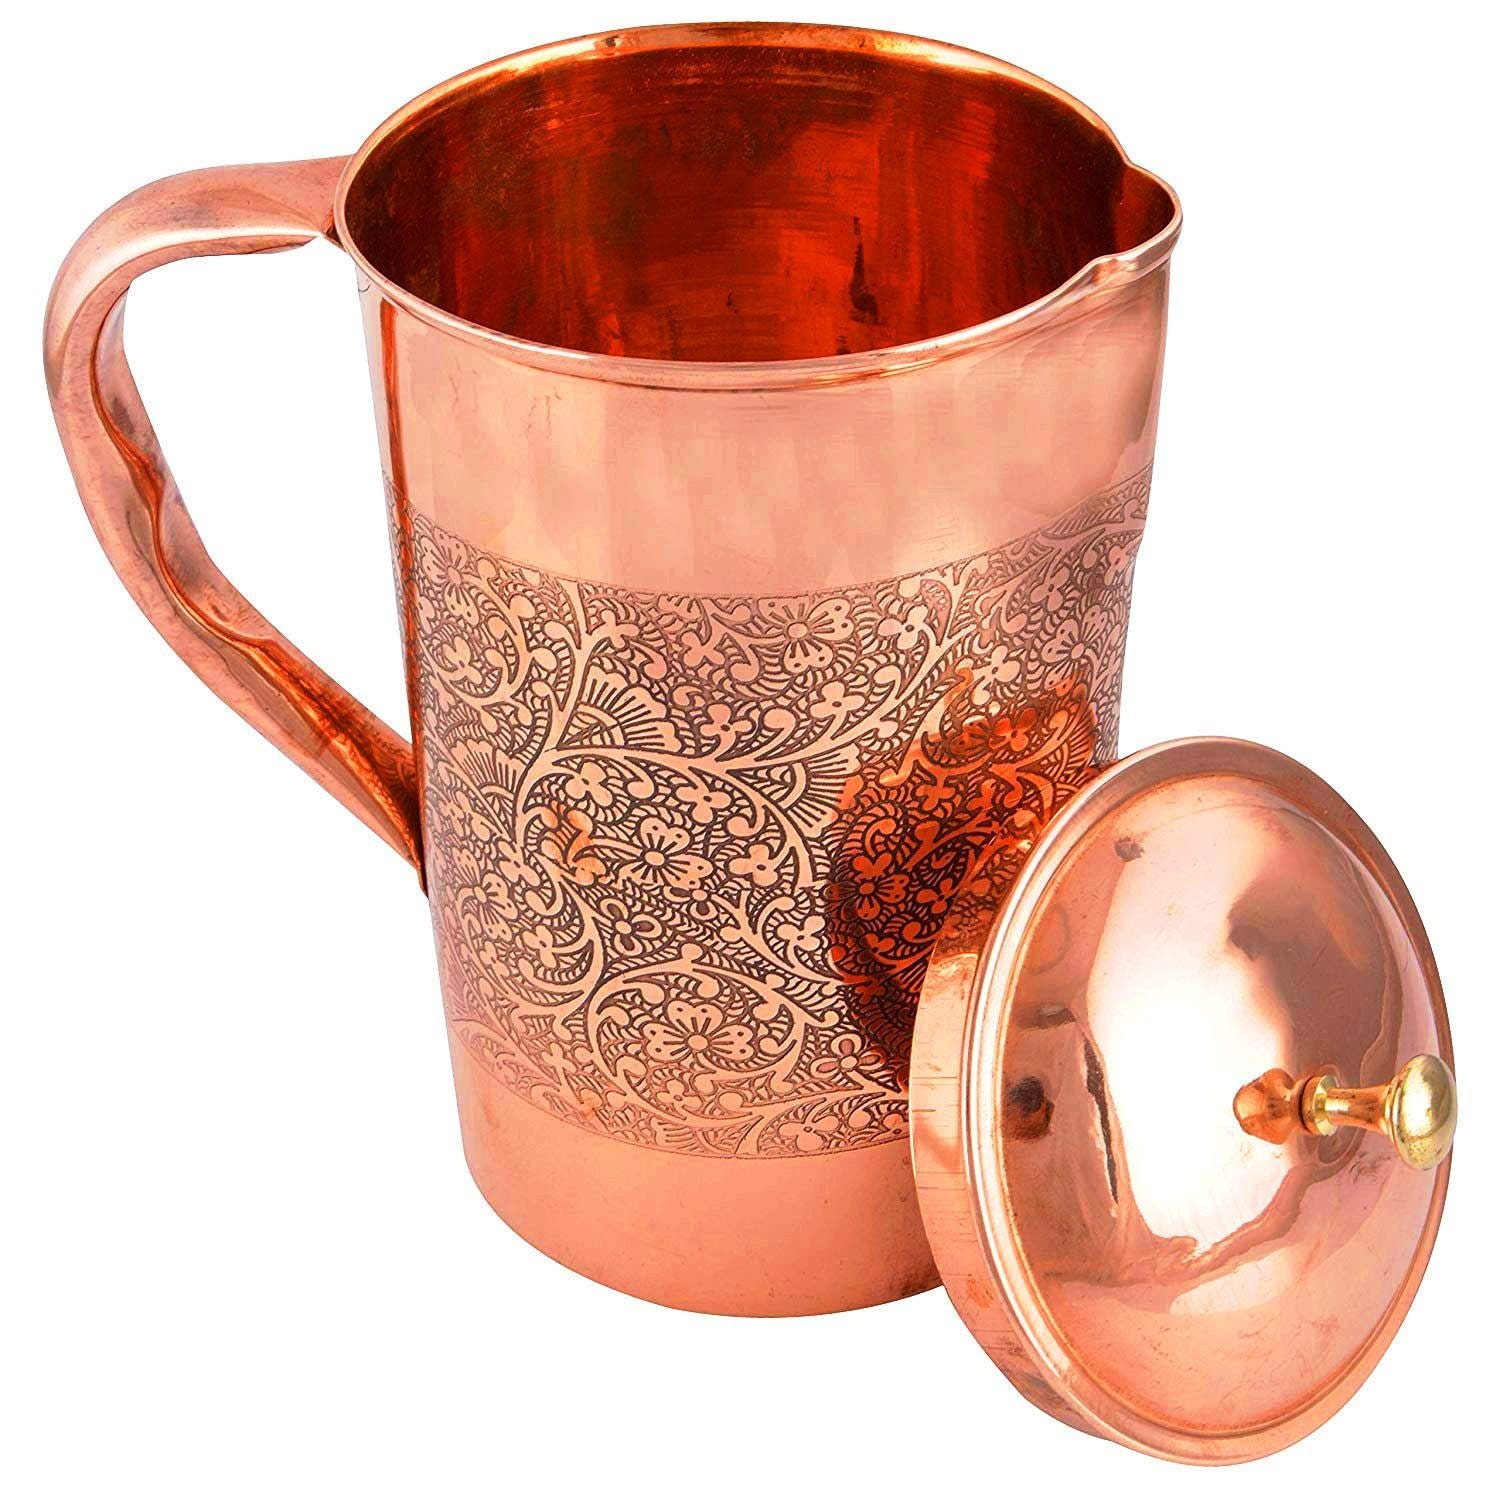 100% Pure Copper Water Jug Pitcher Pot 1500Ml For Drinking Water Health Benefits 